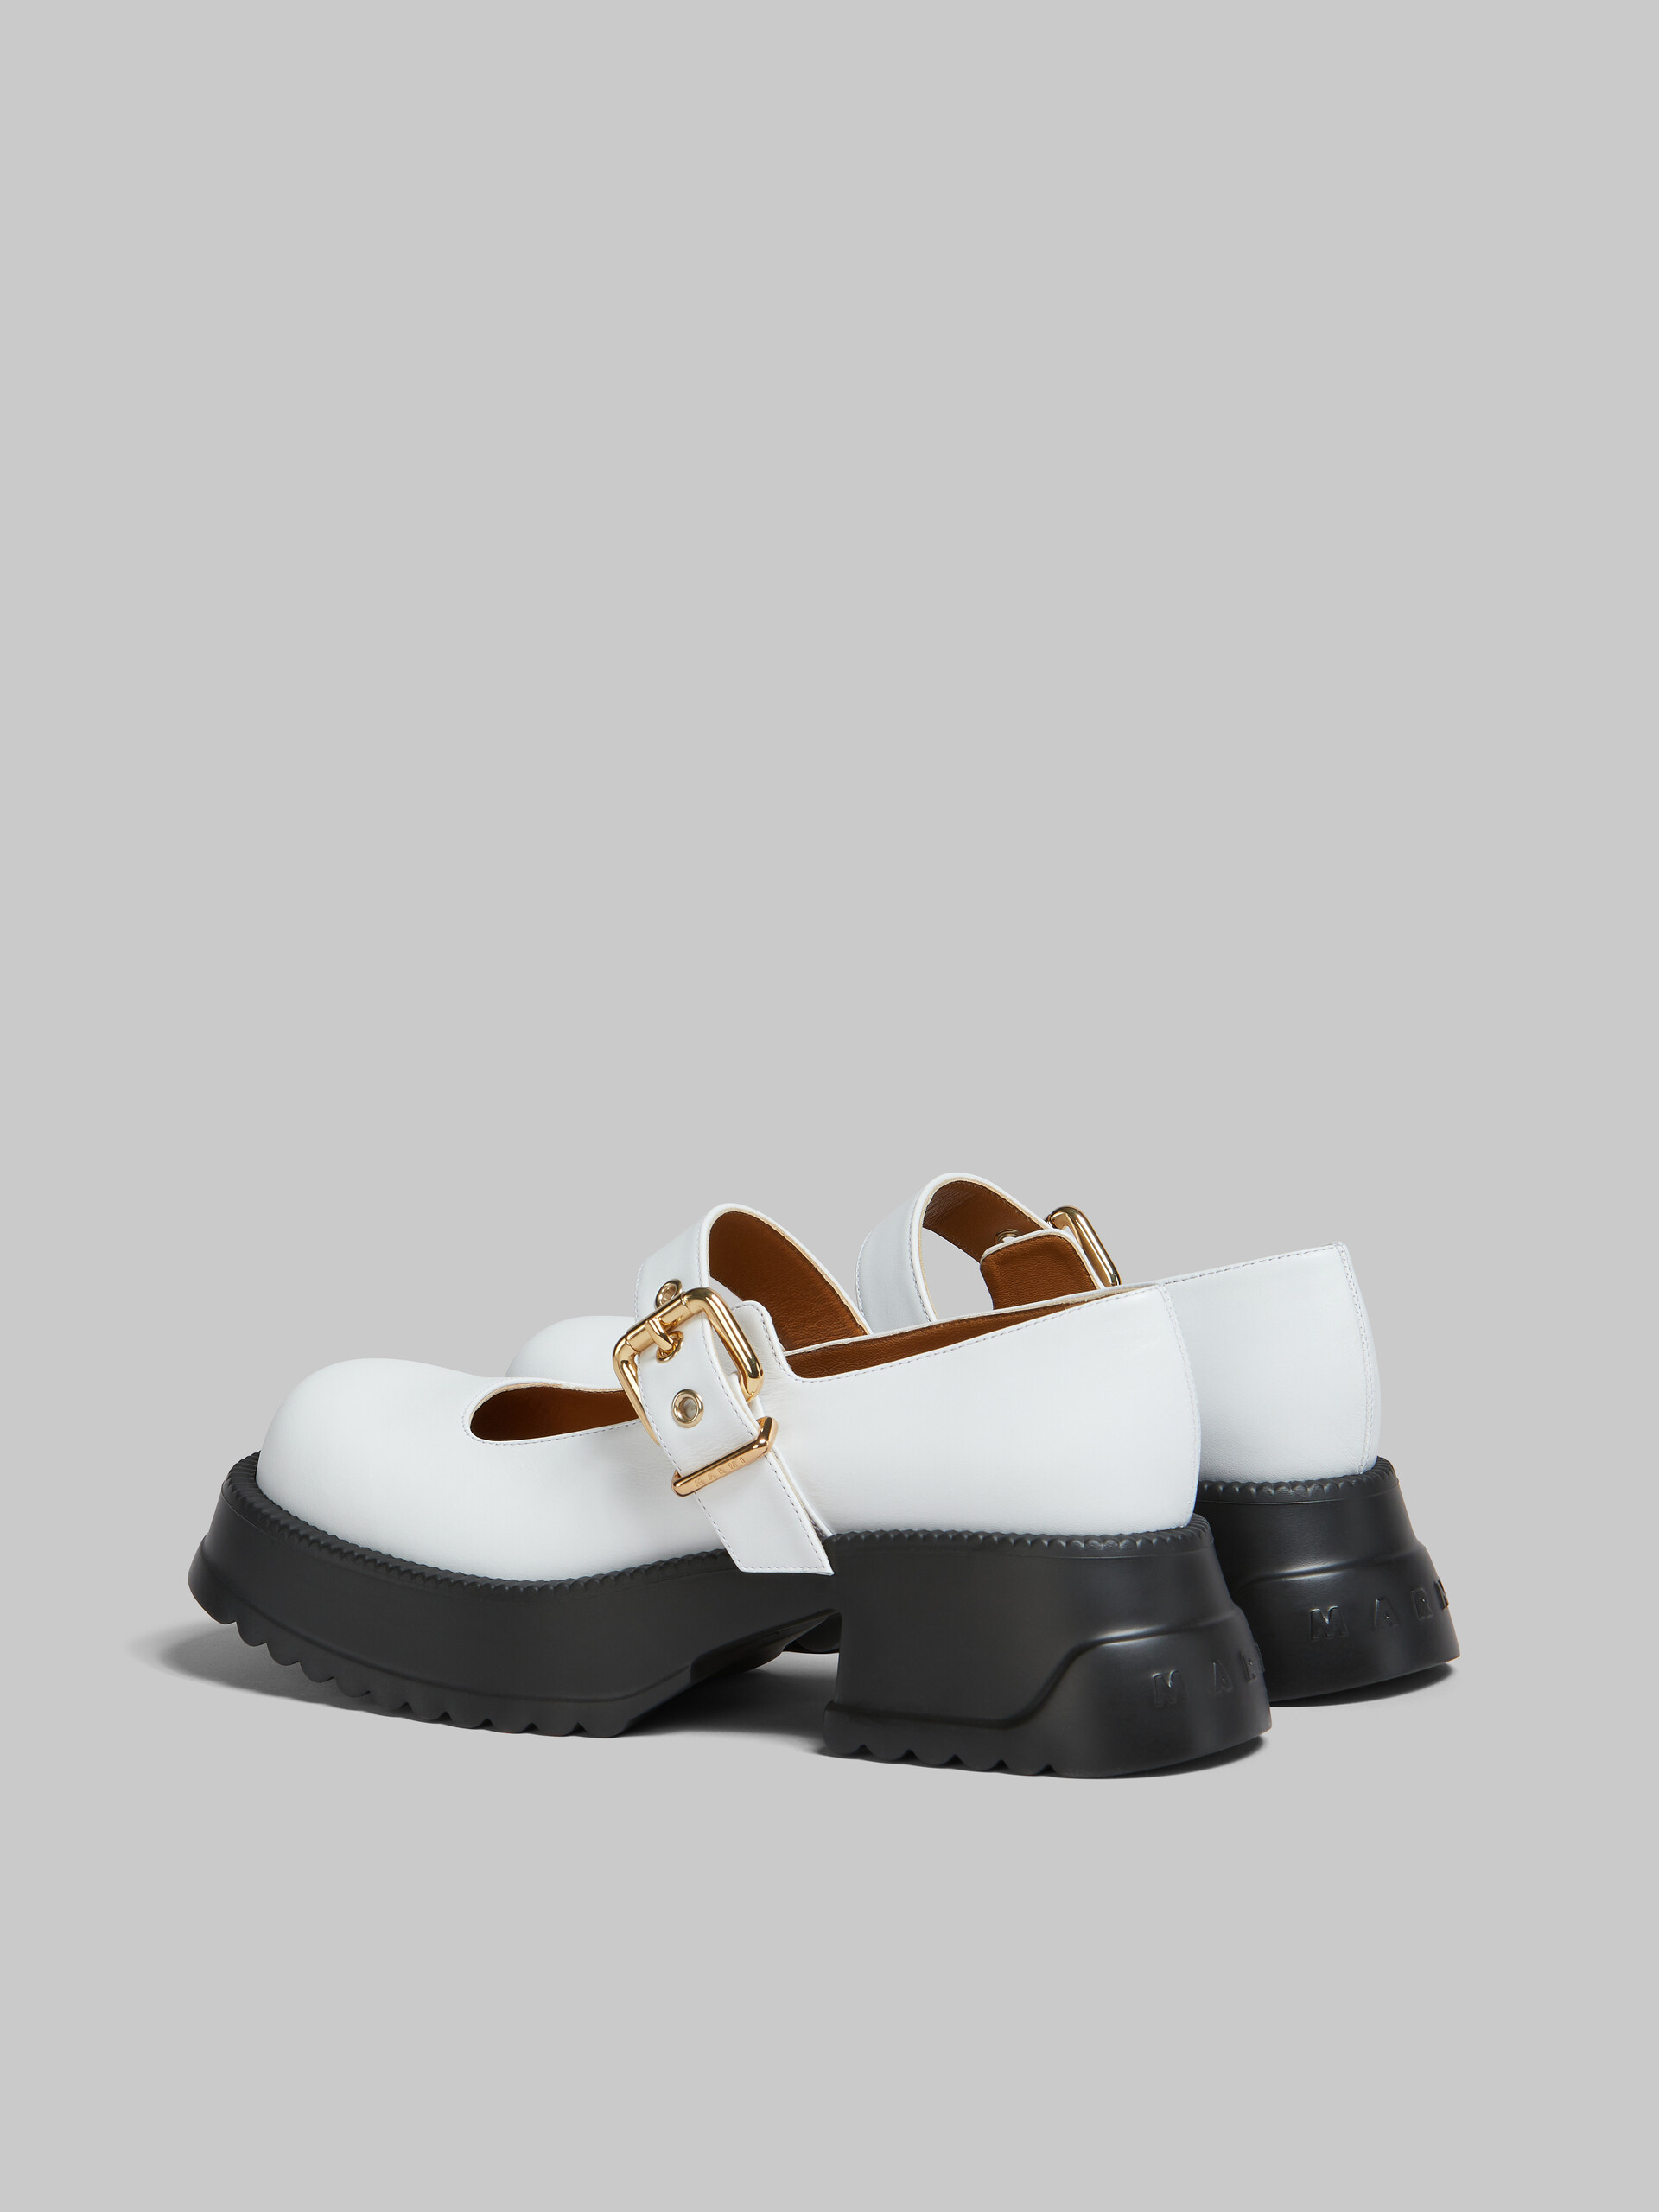 Mary Jane in pelle nera con suola platform - Sneakers - Image 3